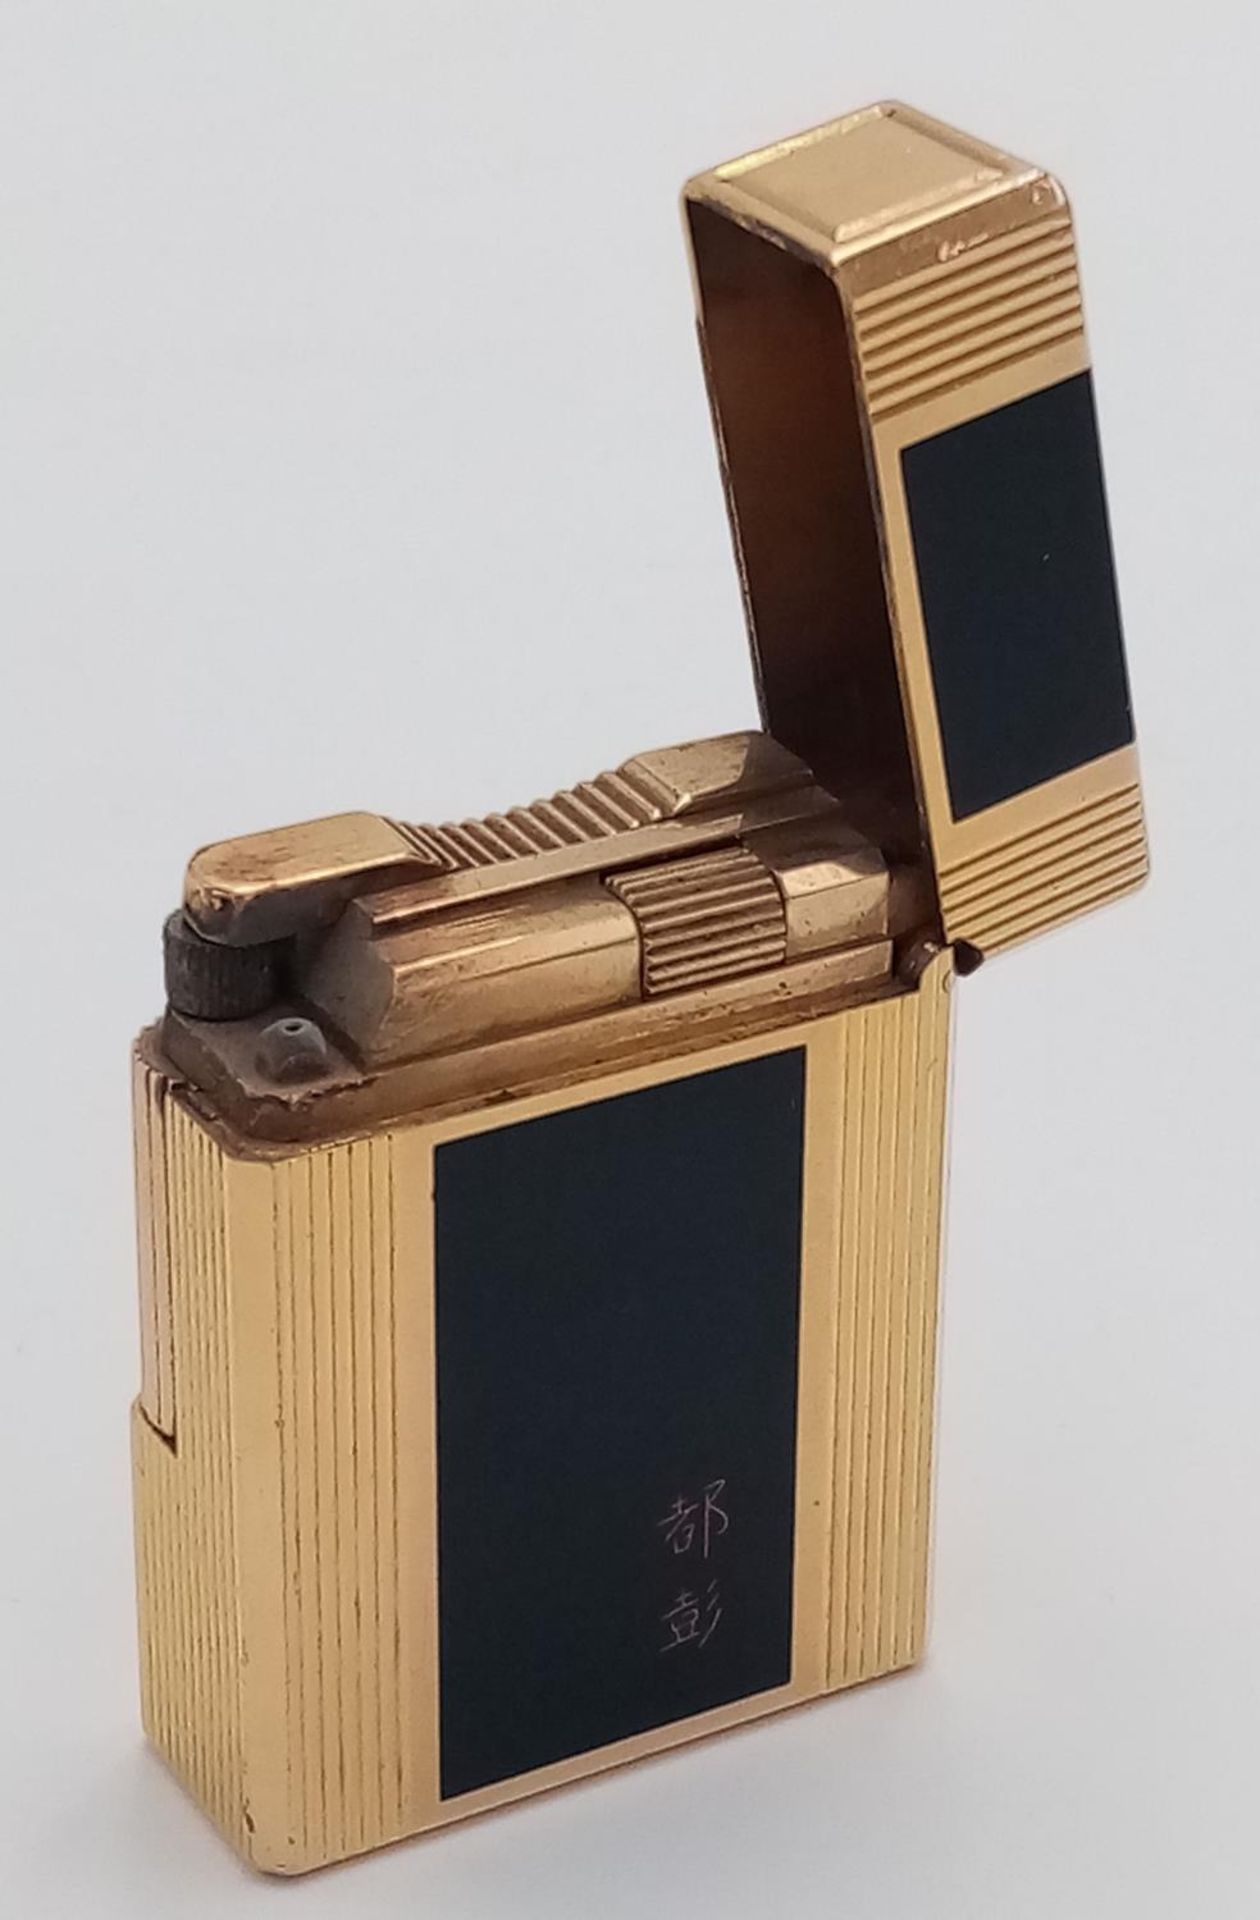 An S.T. Dupont Gold Plated and Black Enamel Lighter. Needs gas and flint. UK MAINLAND SALES ONLY - Image 5 of 5